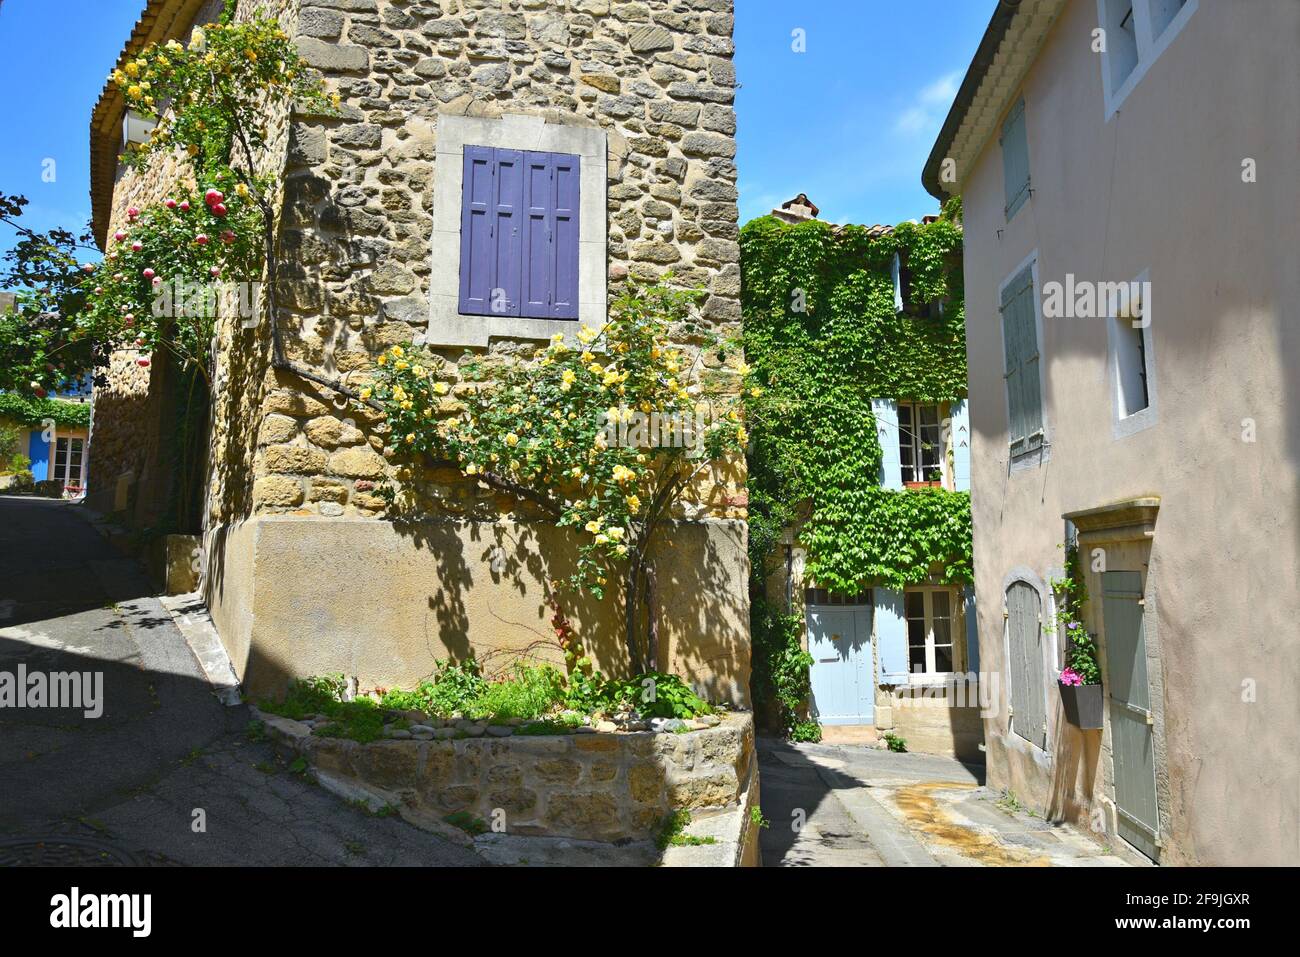 Typical Provençal style rural houses in the picturesque village of Lourmarin in Vaucluse, Provence France. Stock Photo